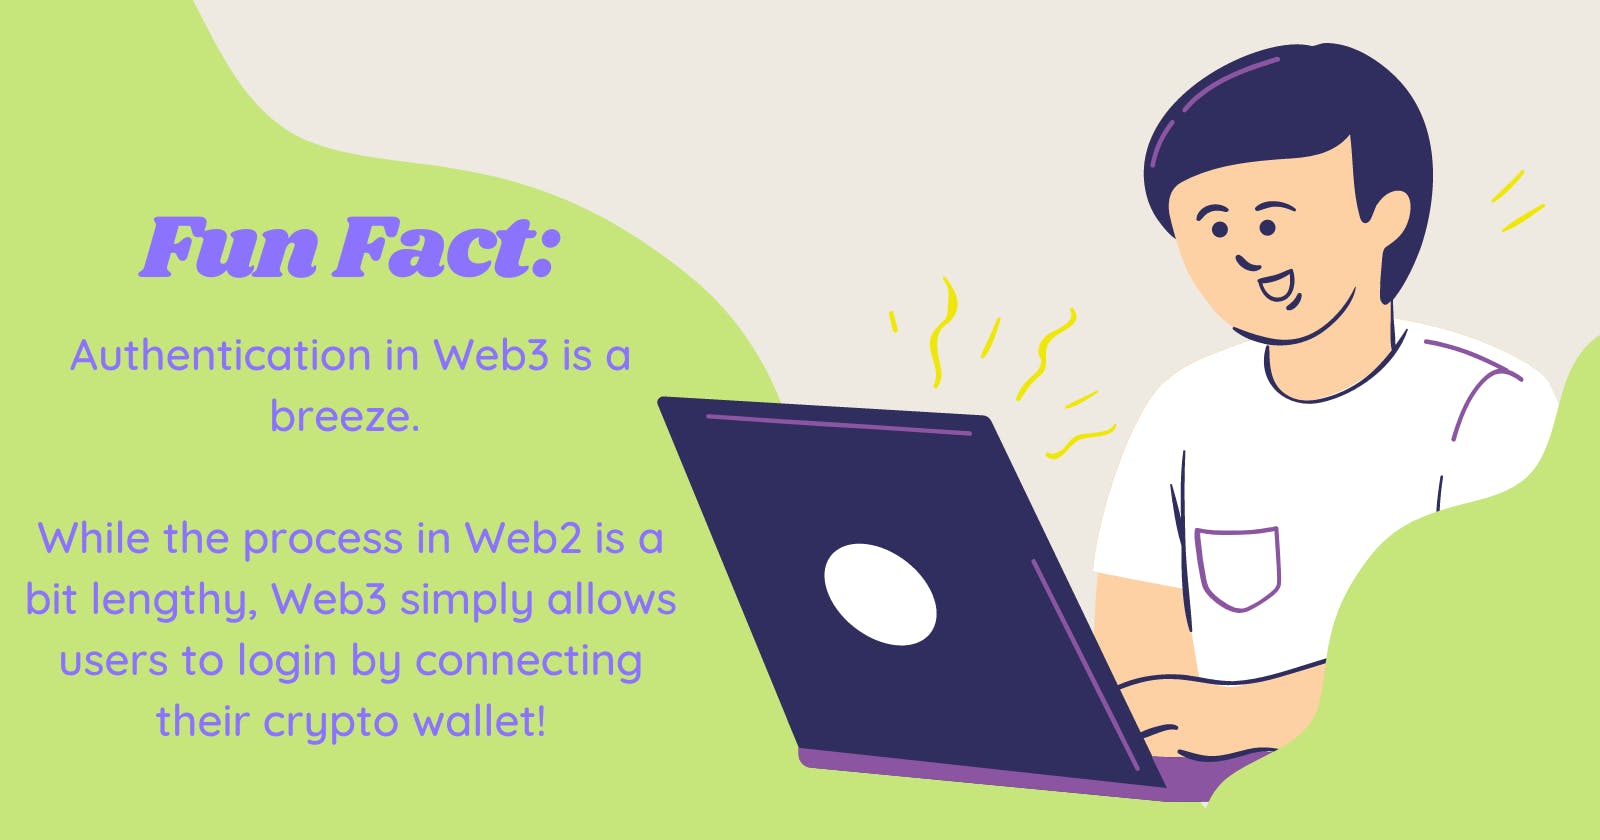 Fun fact: Authentication in Web3 is a breeze. While the process in Web2 is a bit lengthy, Web3 simply allows users to login by connecting their crypto wallet!